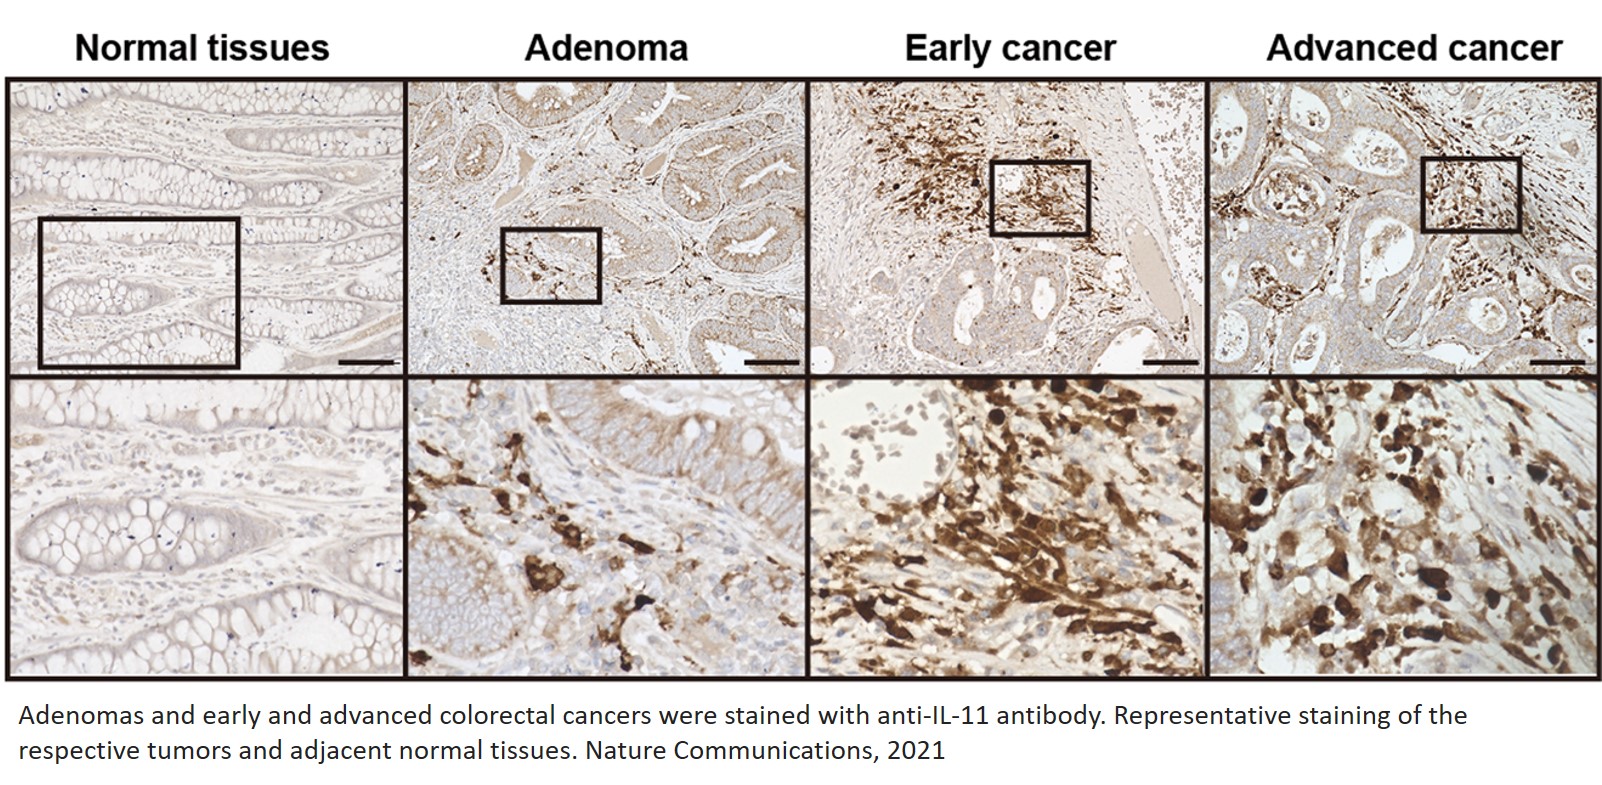 Interleukin 11 as a marker of colorectal cancer-associated fibroblasts